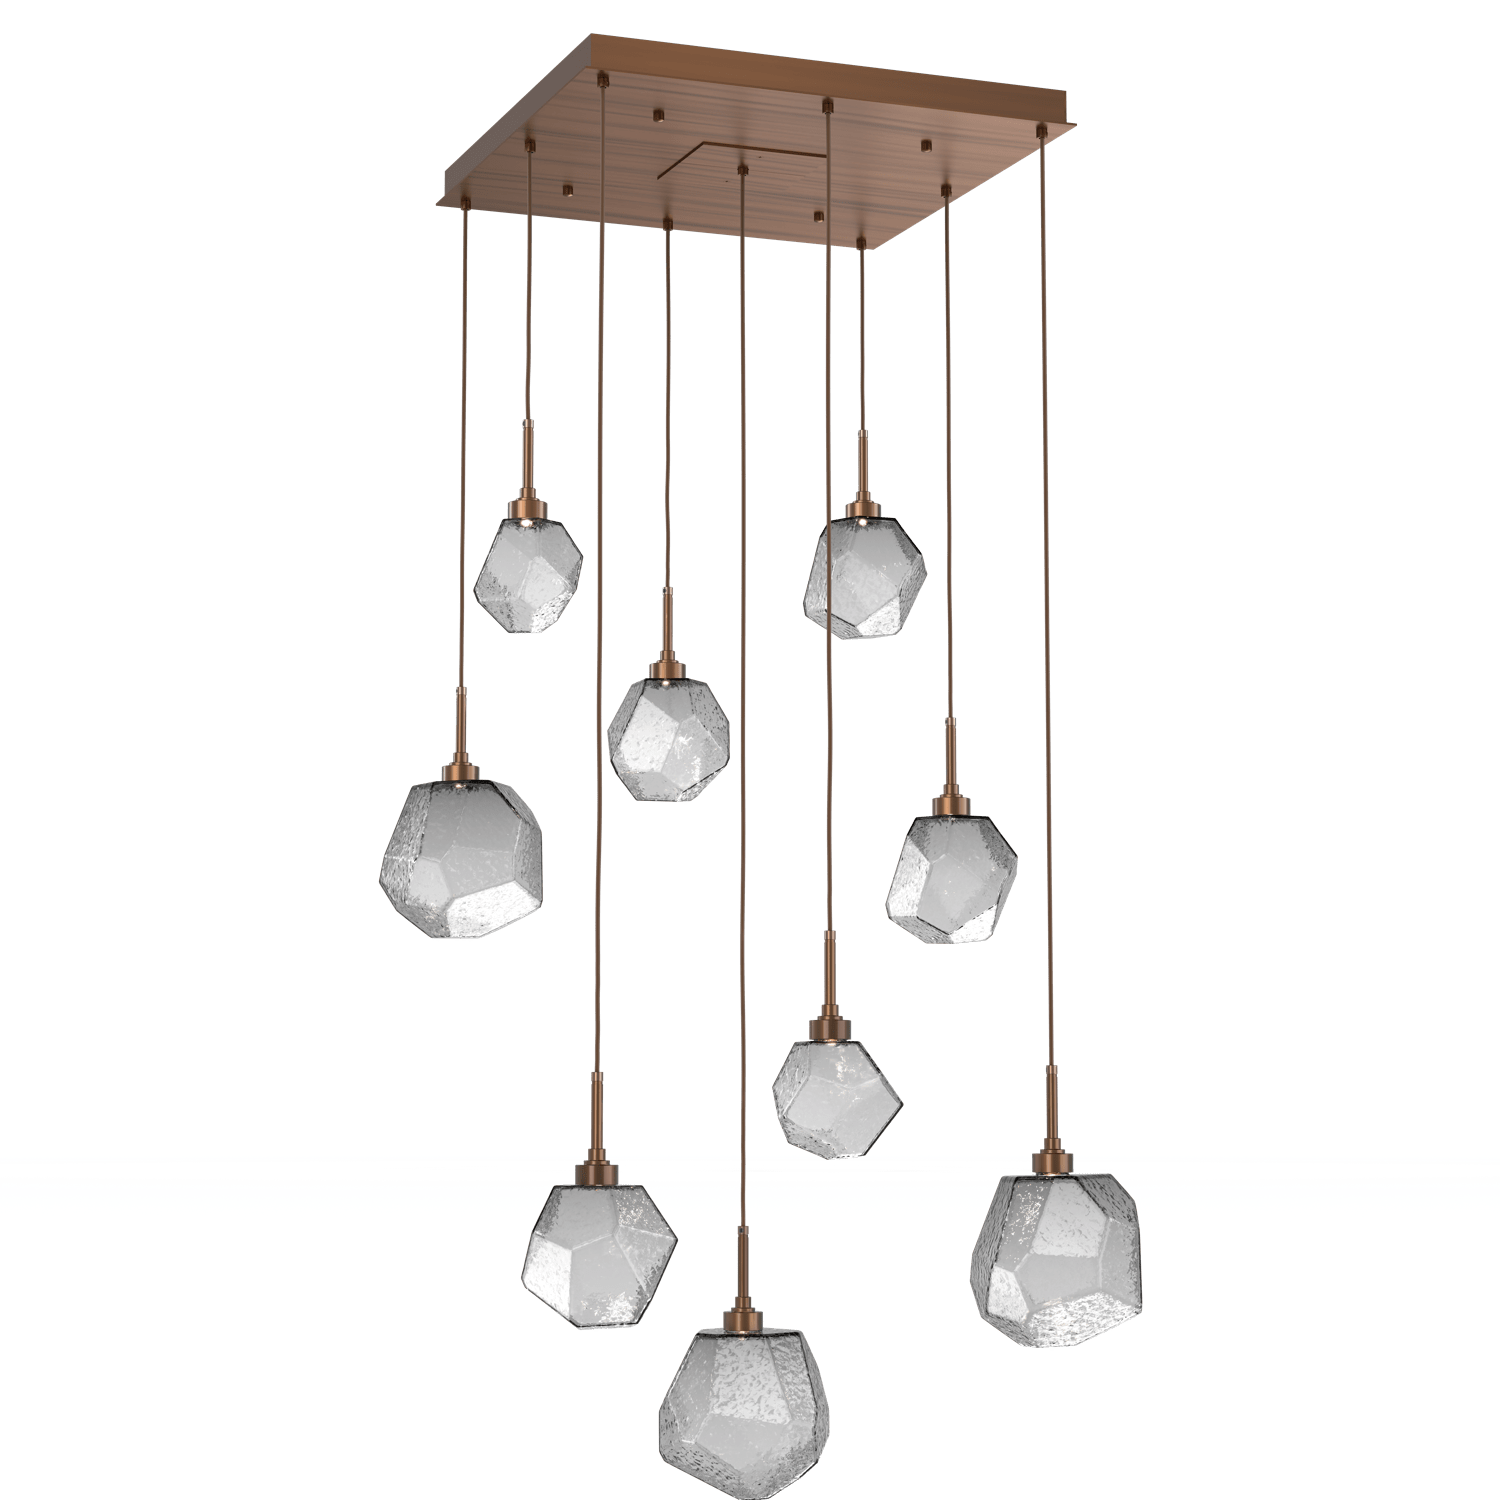 CHB0039-09-RB-S-Hammerton-Studio-Gem-9-light-square-pendant-chandelier-with-oil-rubbed-bronze-finish-and-smoke-blown-glass-shades-and-LED-lamping